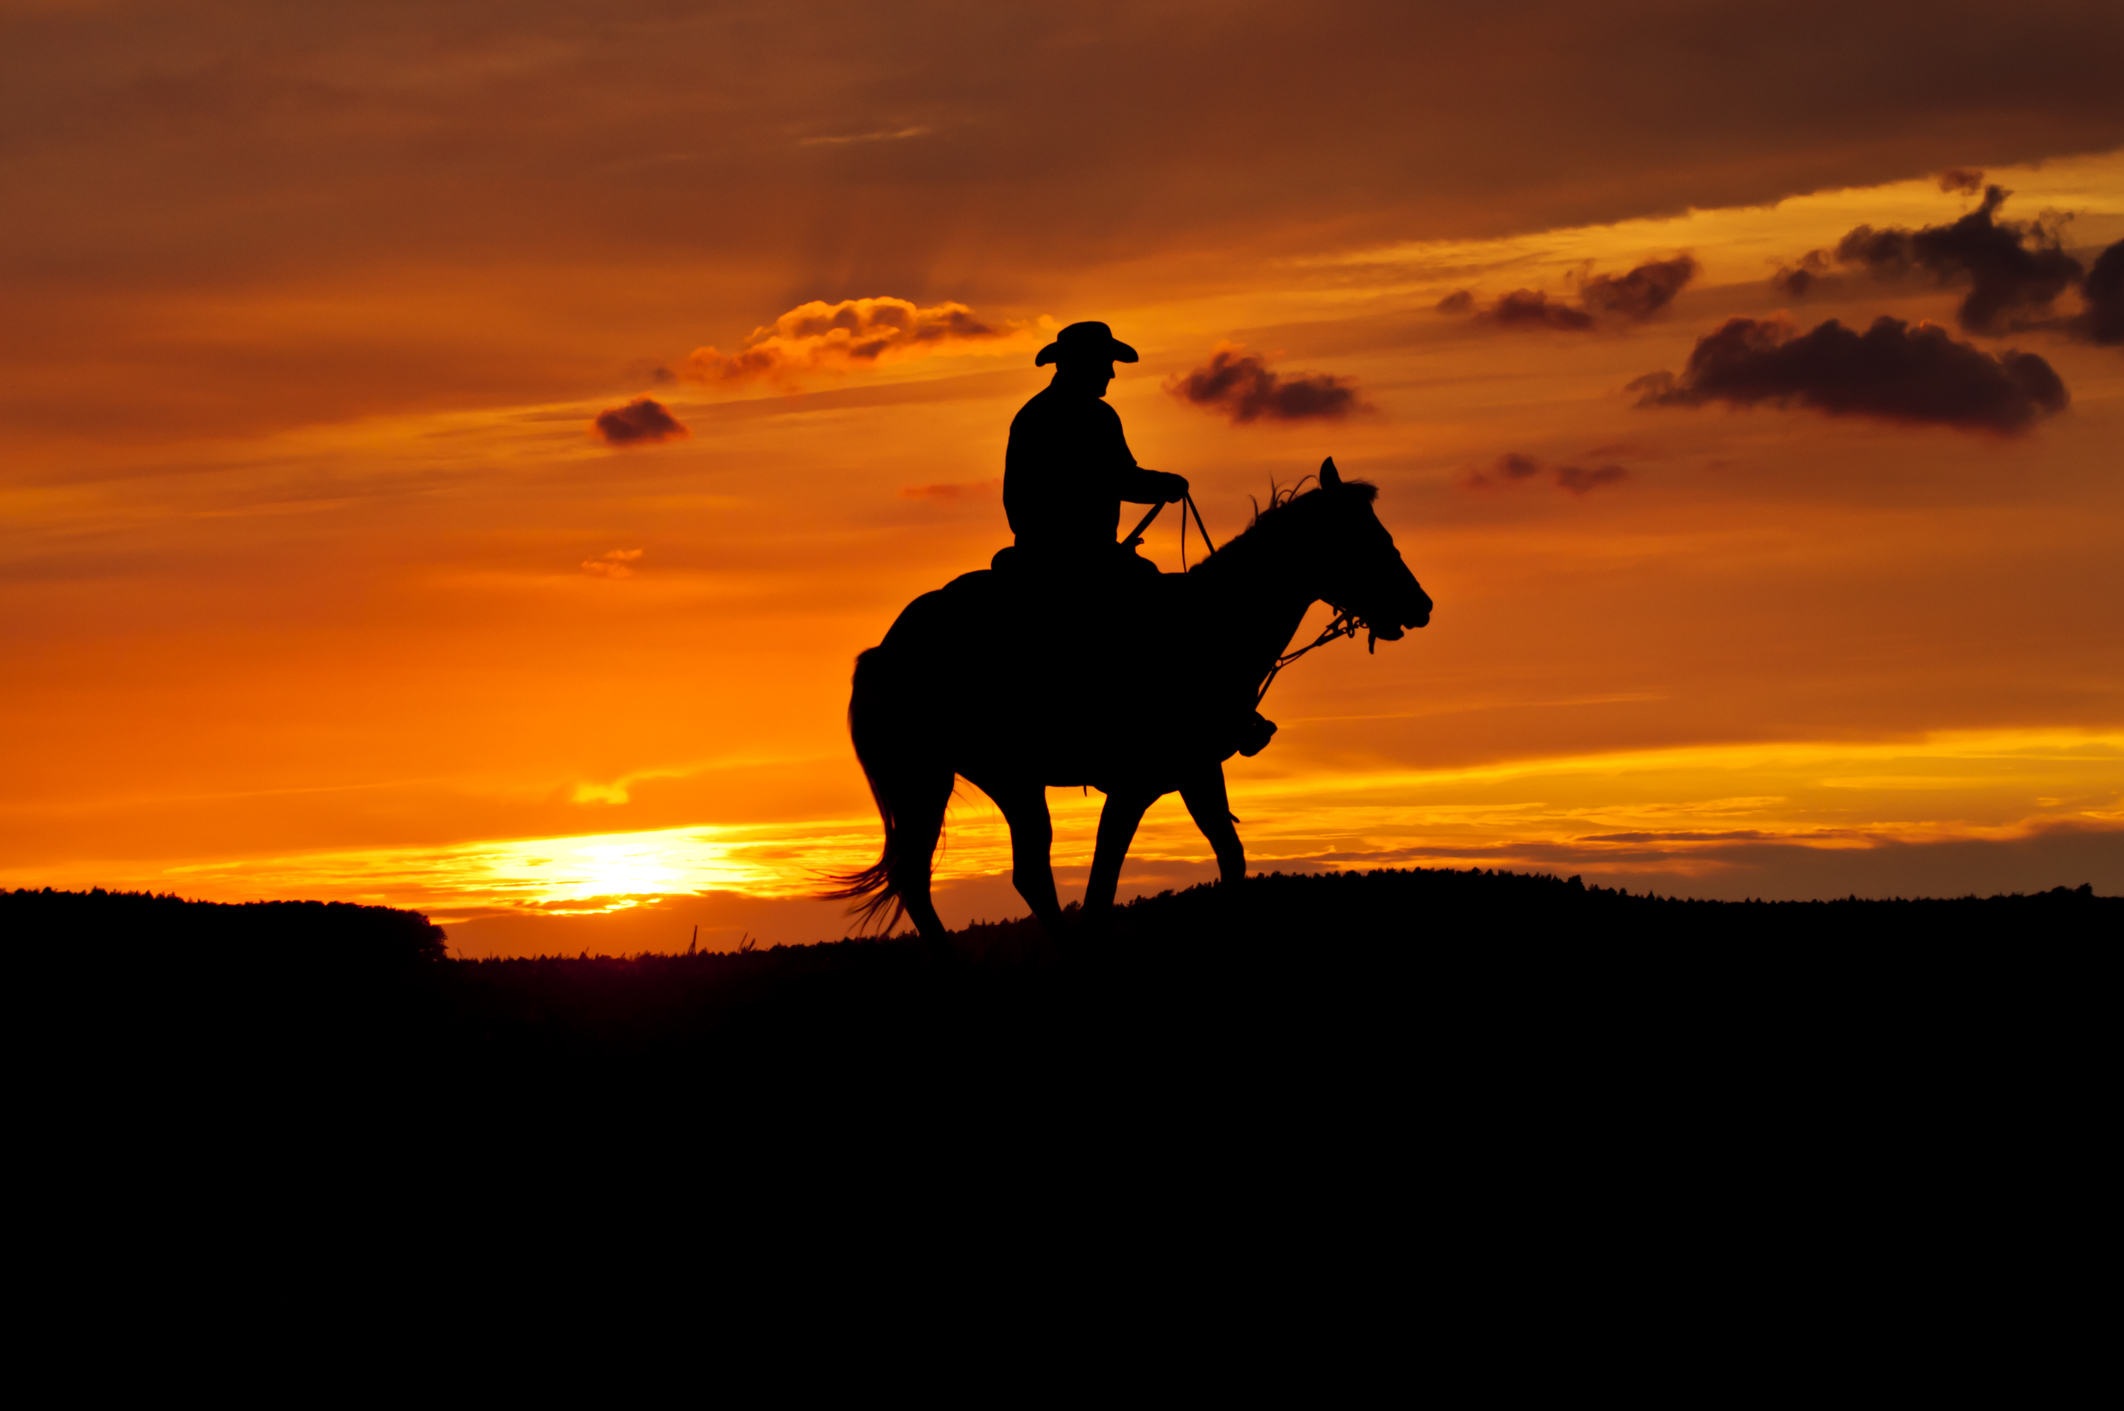 Black silhouette of a cowboy riding a horse at sunset